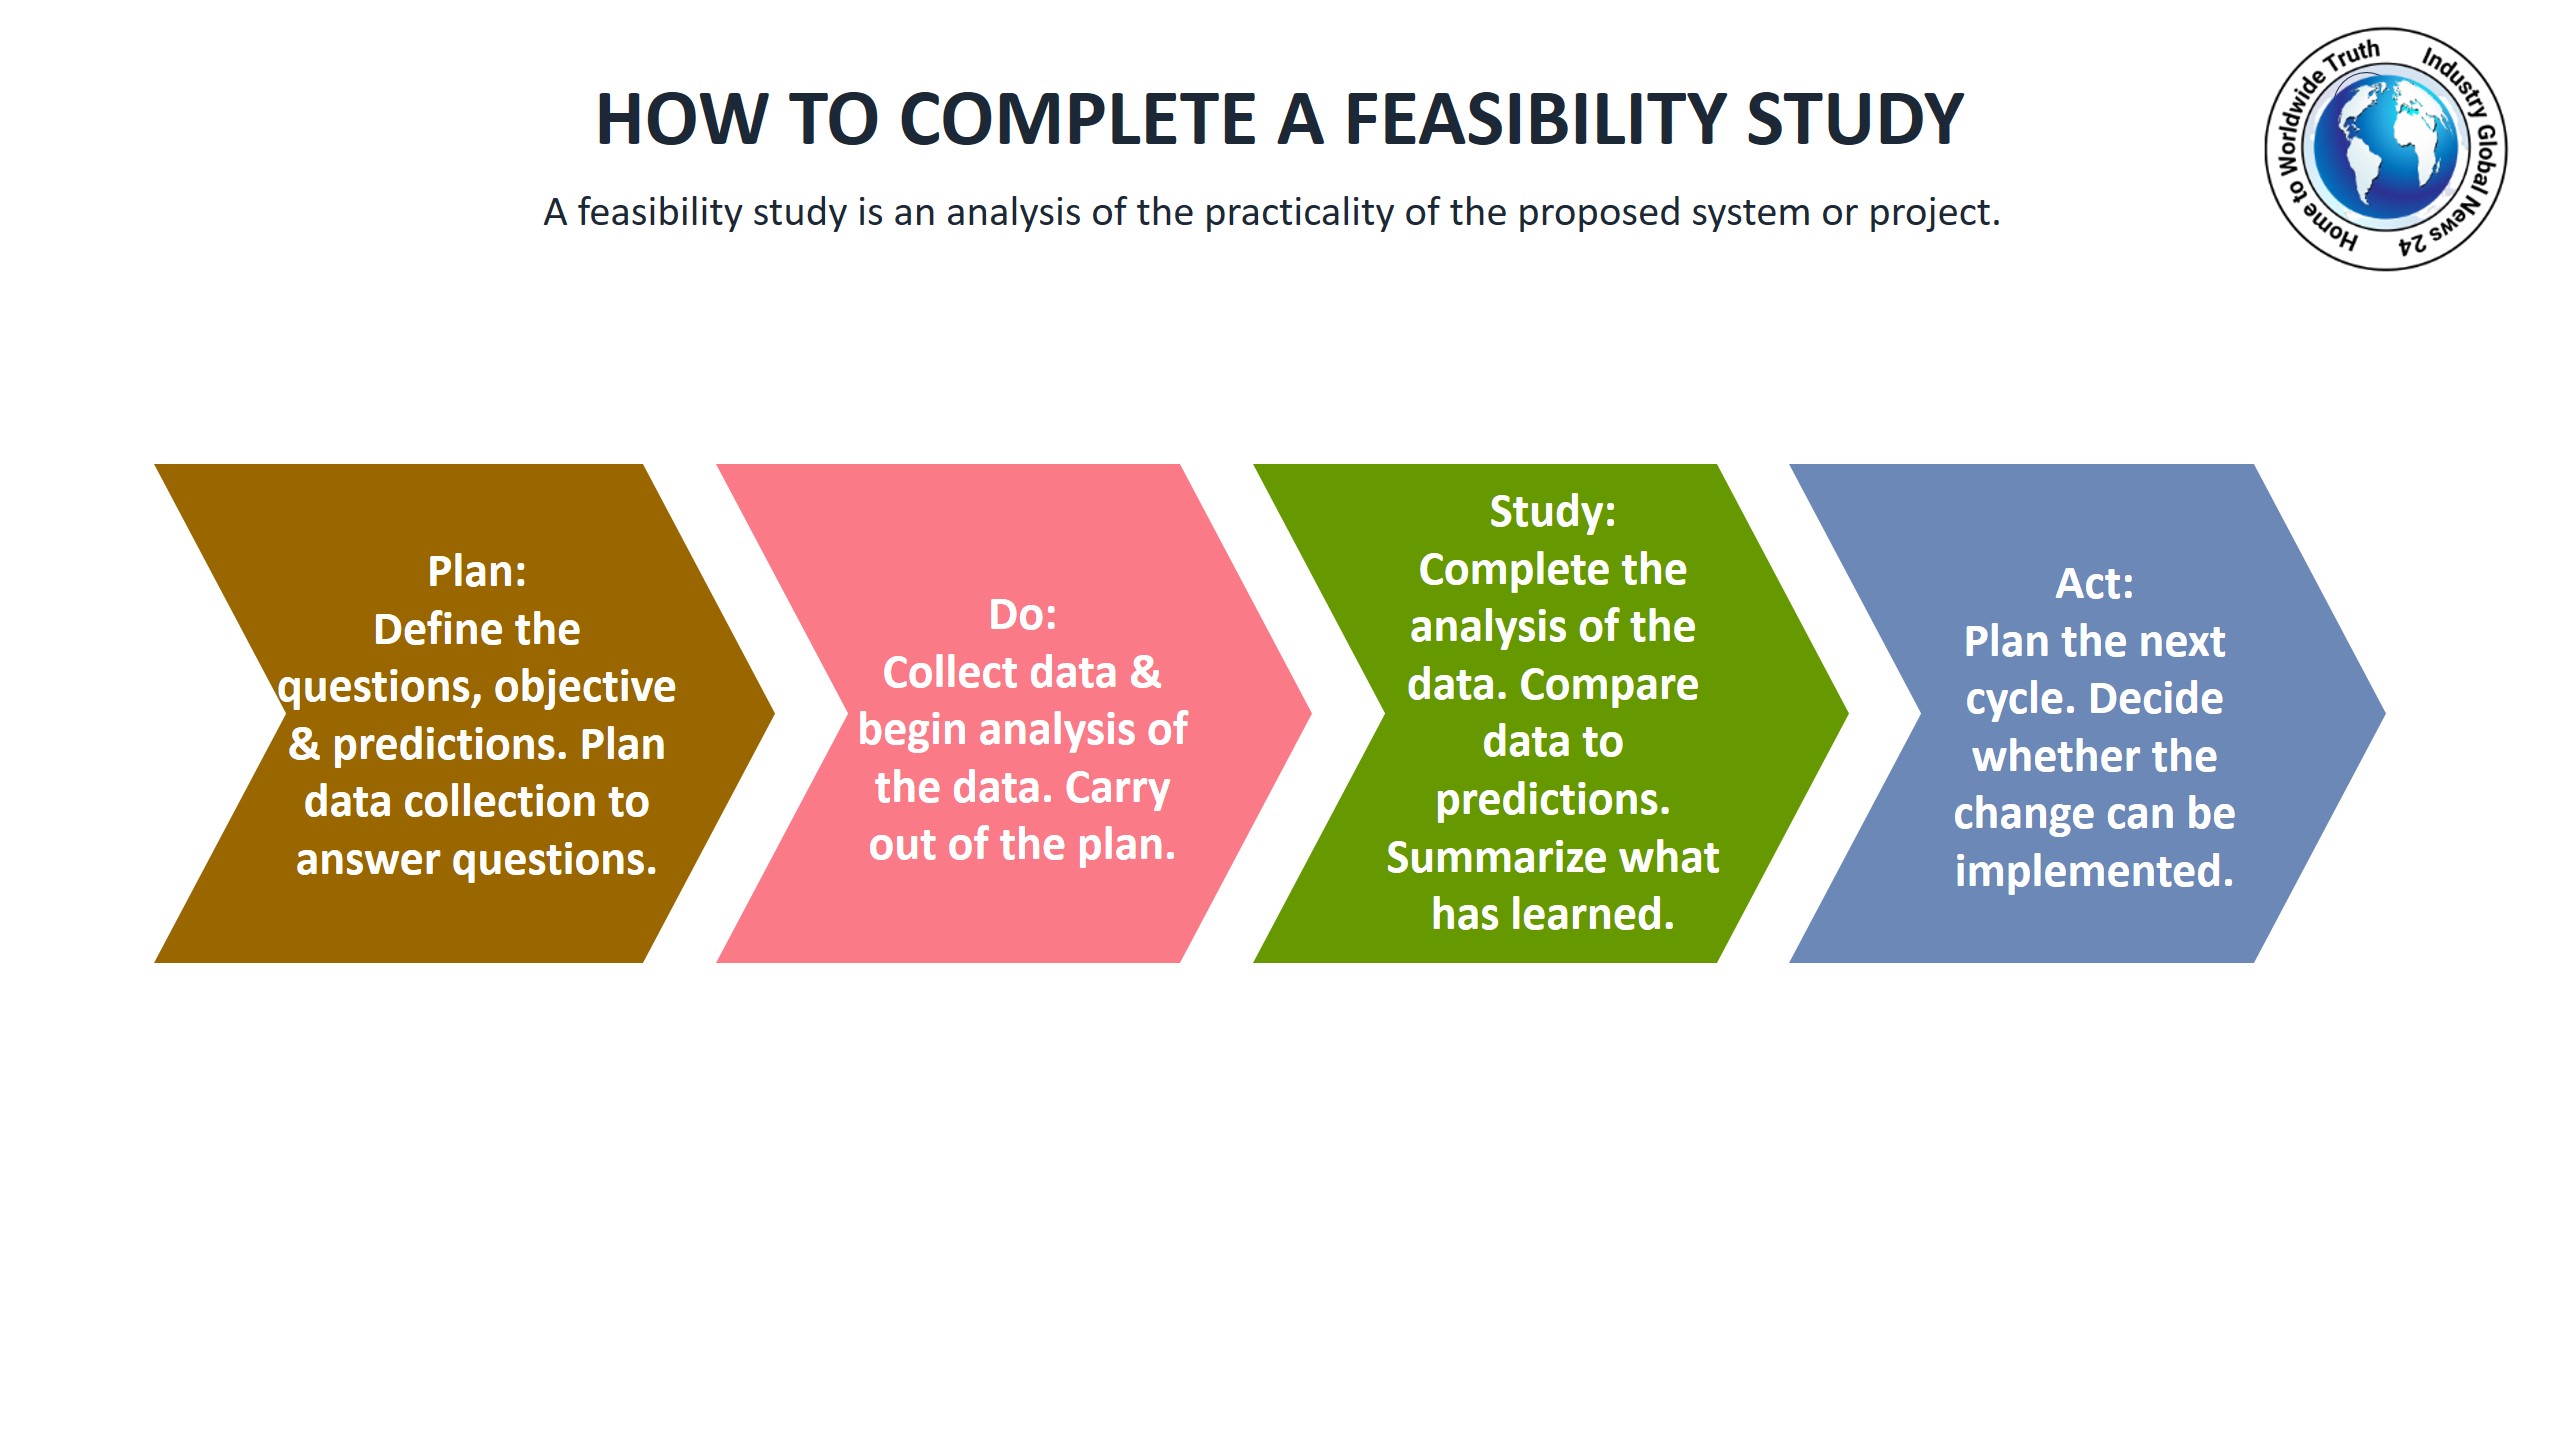 How to complete a feasibility study